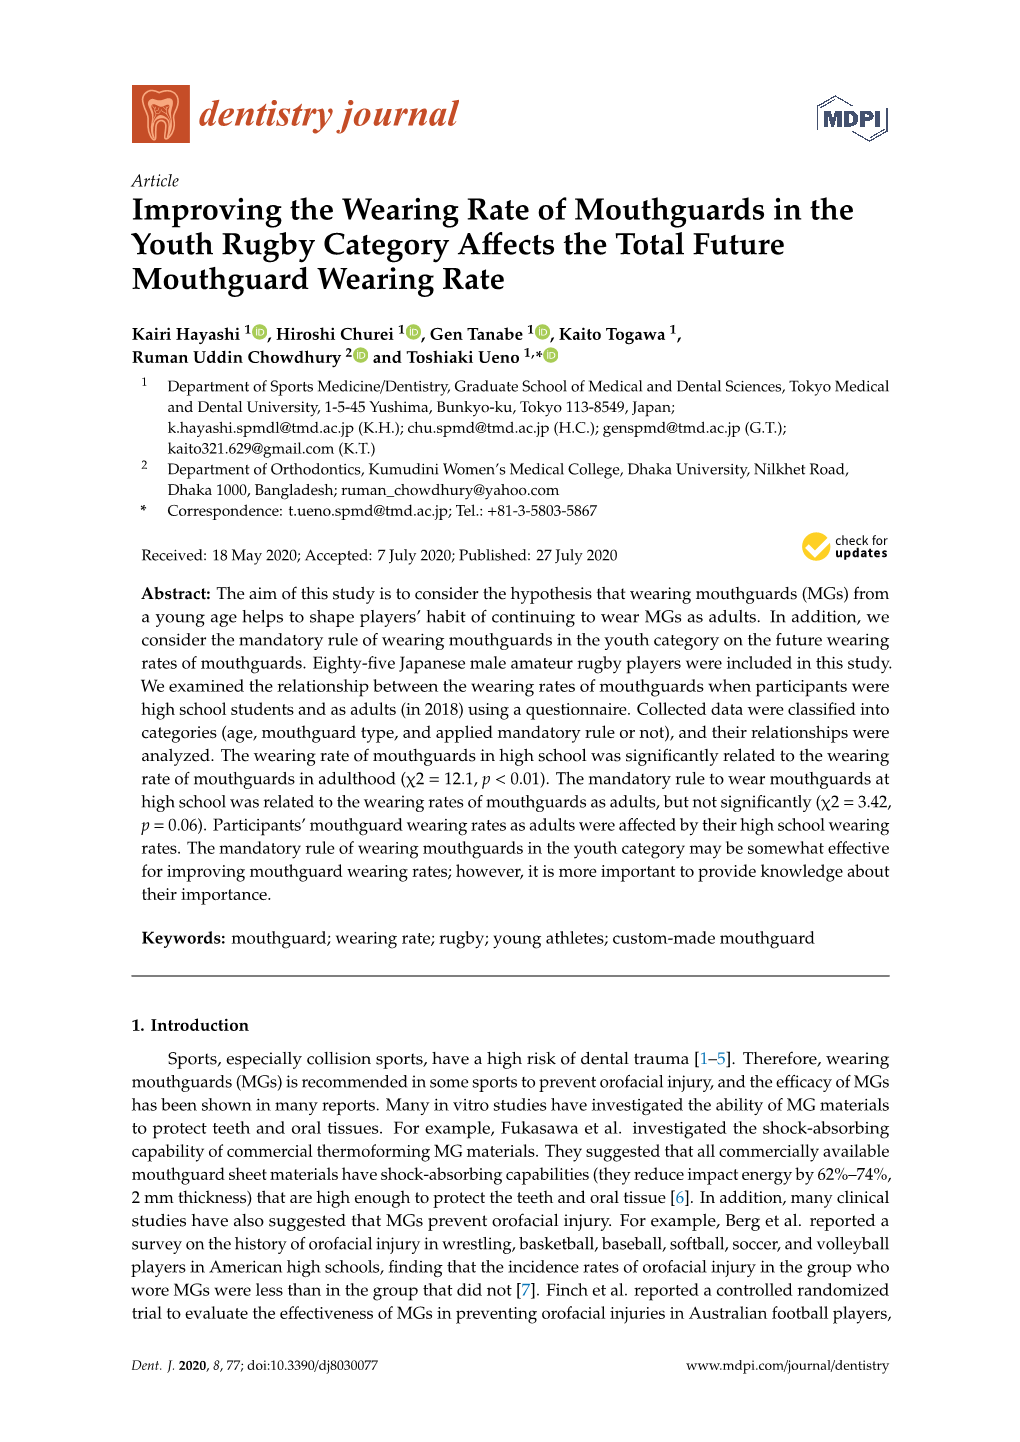 Improving the Wearing Rate of Mouthguards in the Youth Rugby Category Affects the Total Future Mouthguard Wearing Rate